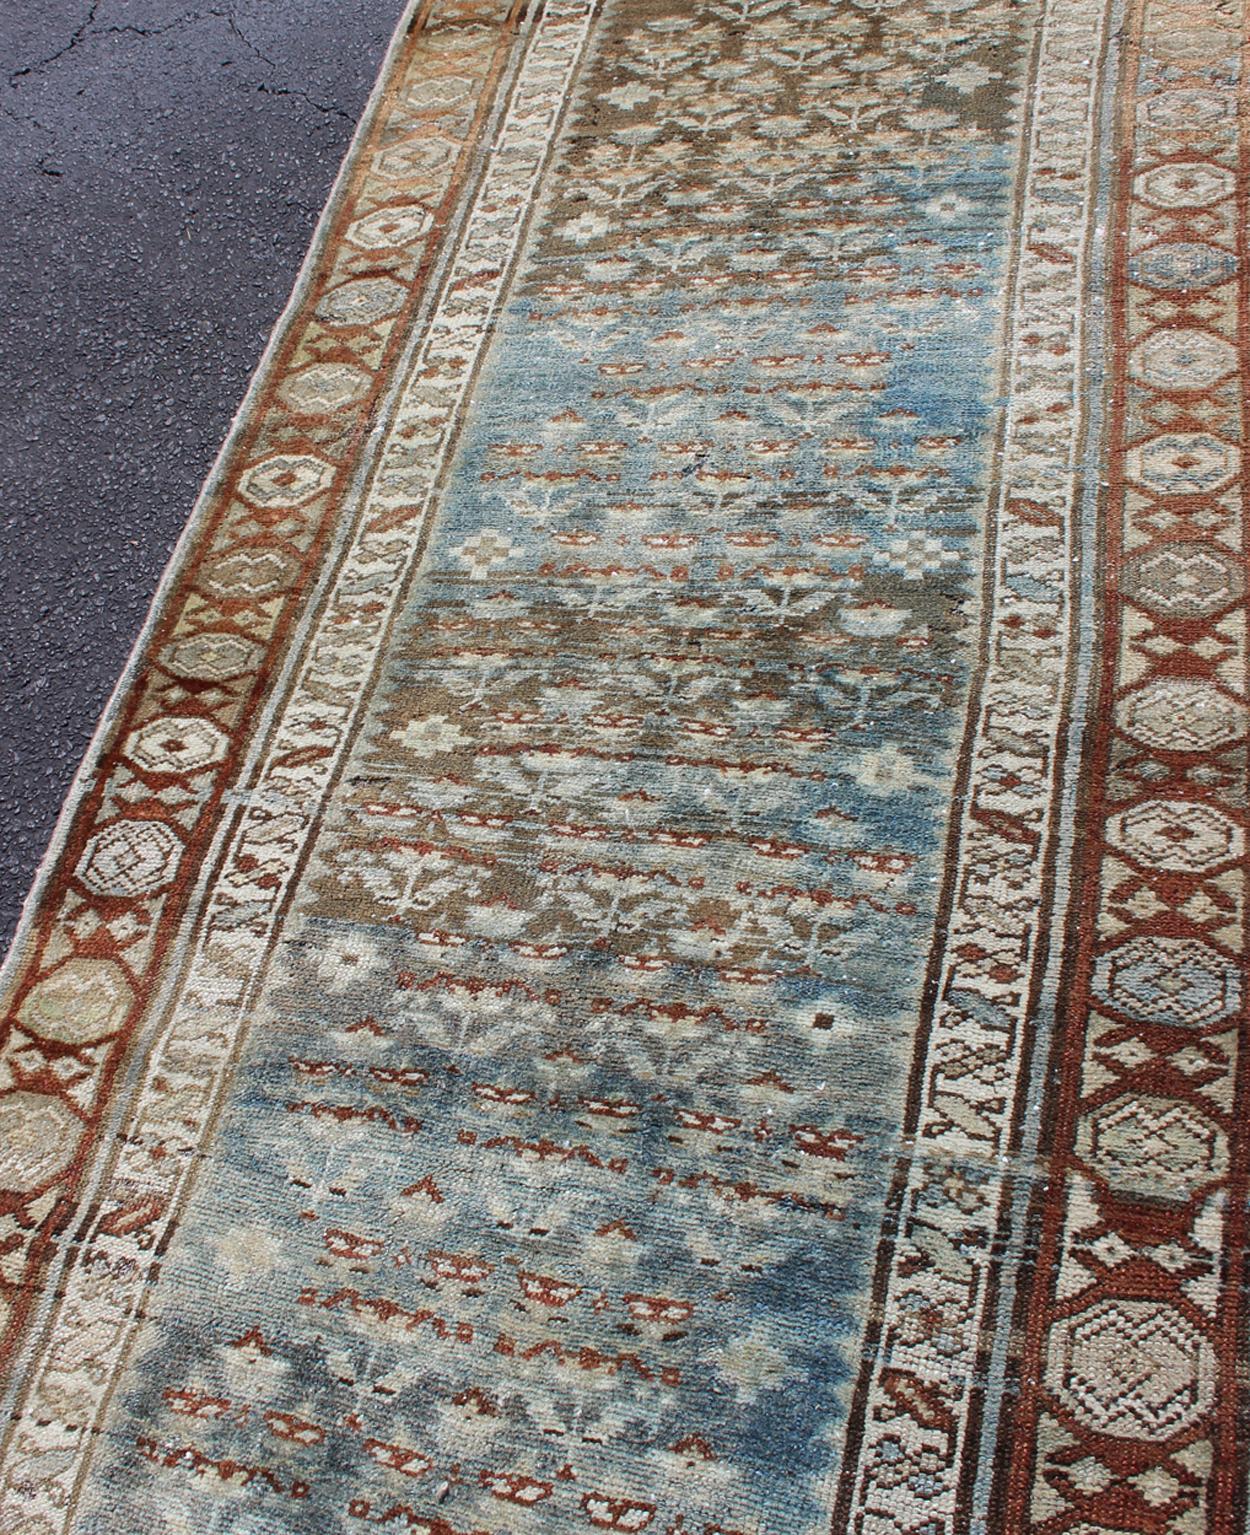 Antique Persian Malayer Runner in Gray, Blue, and Red with All-Over Design 5